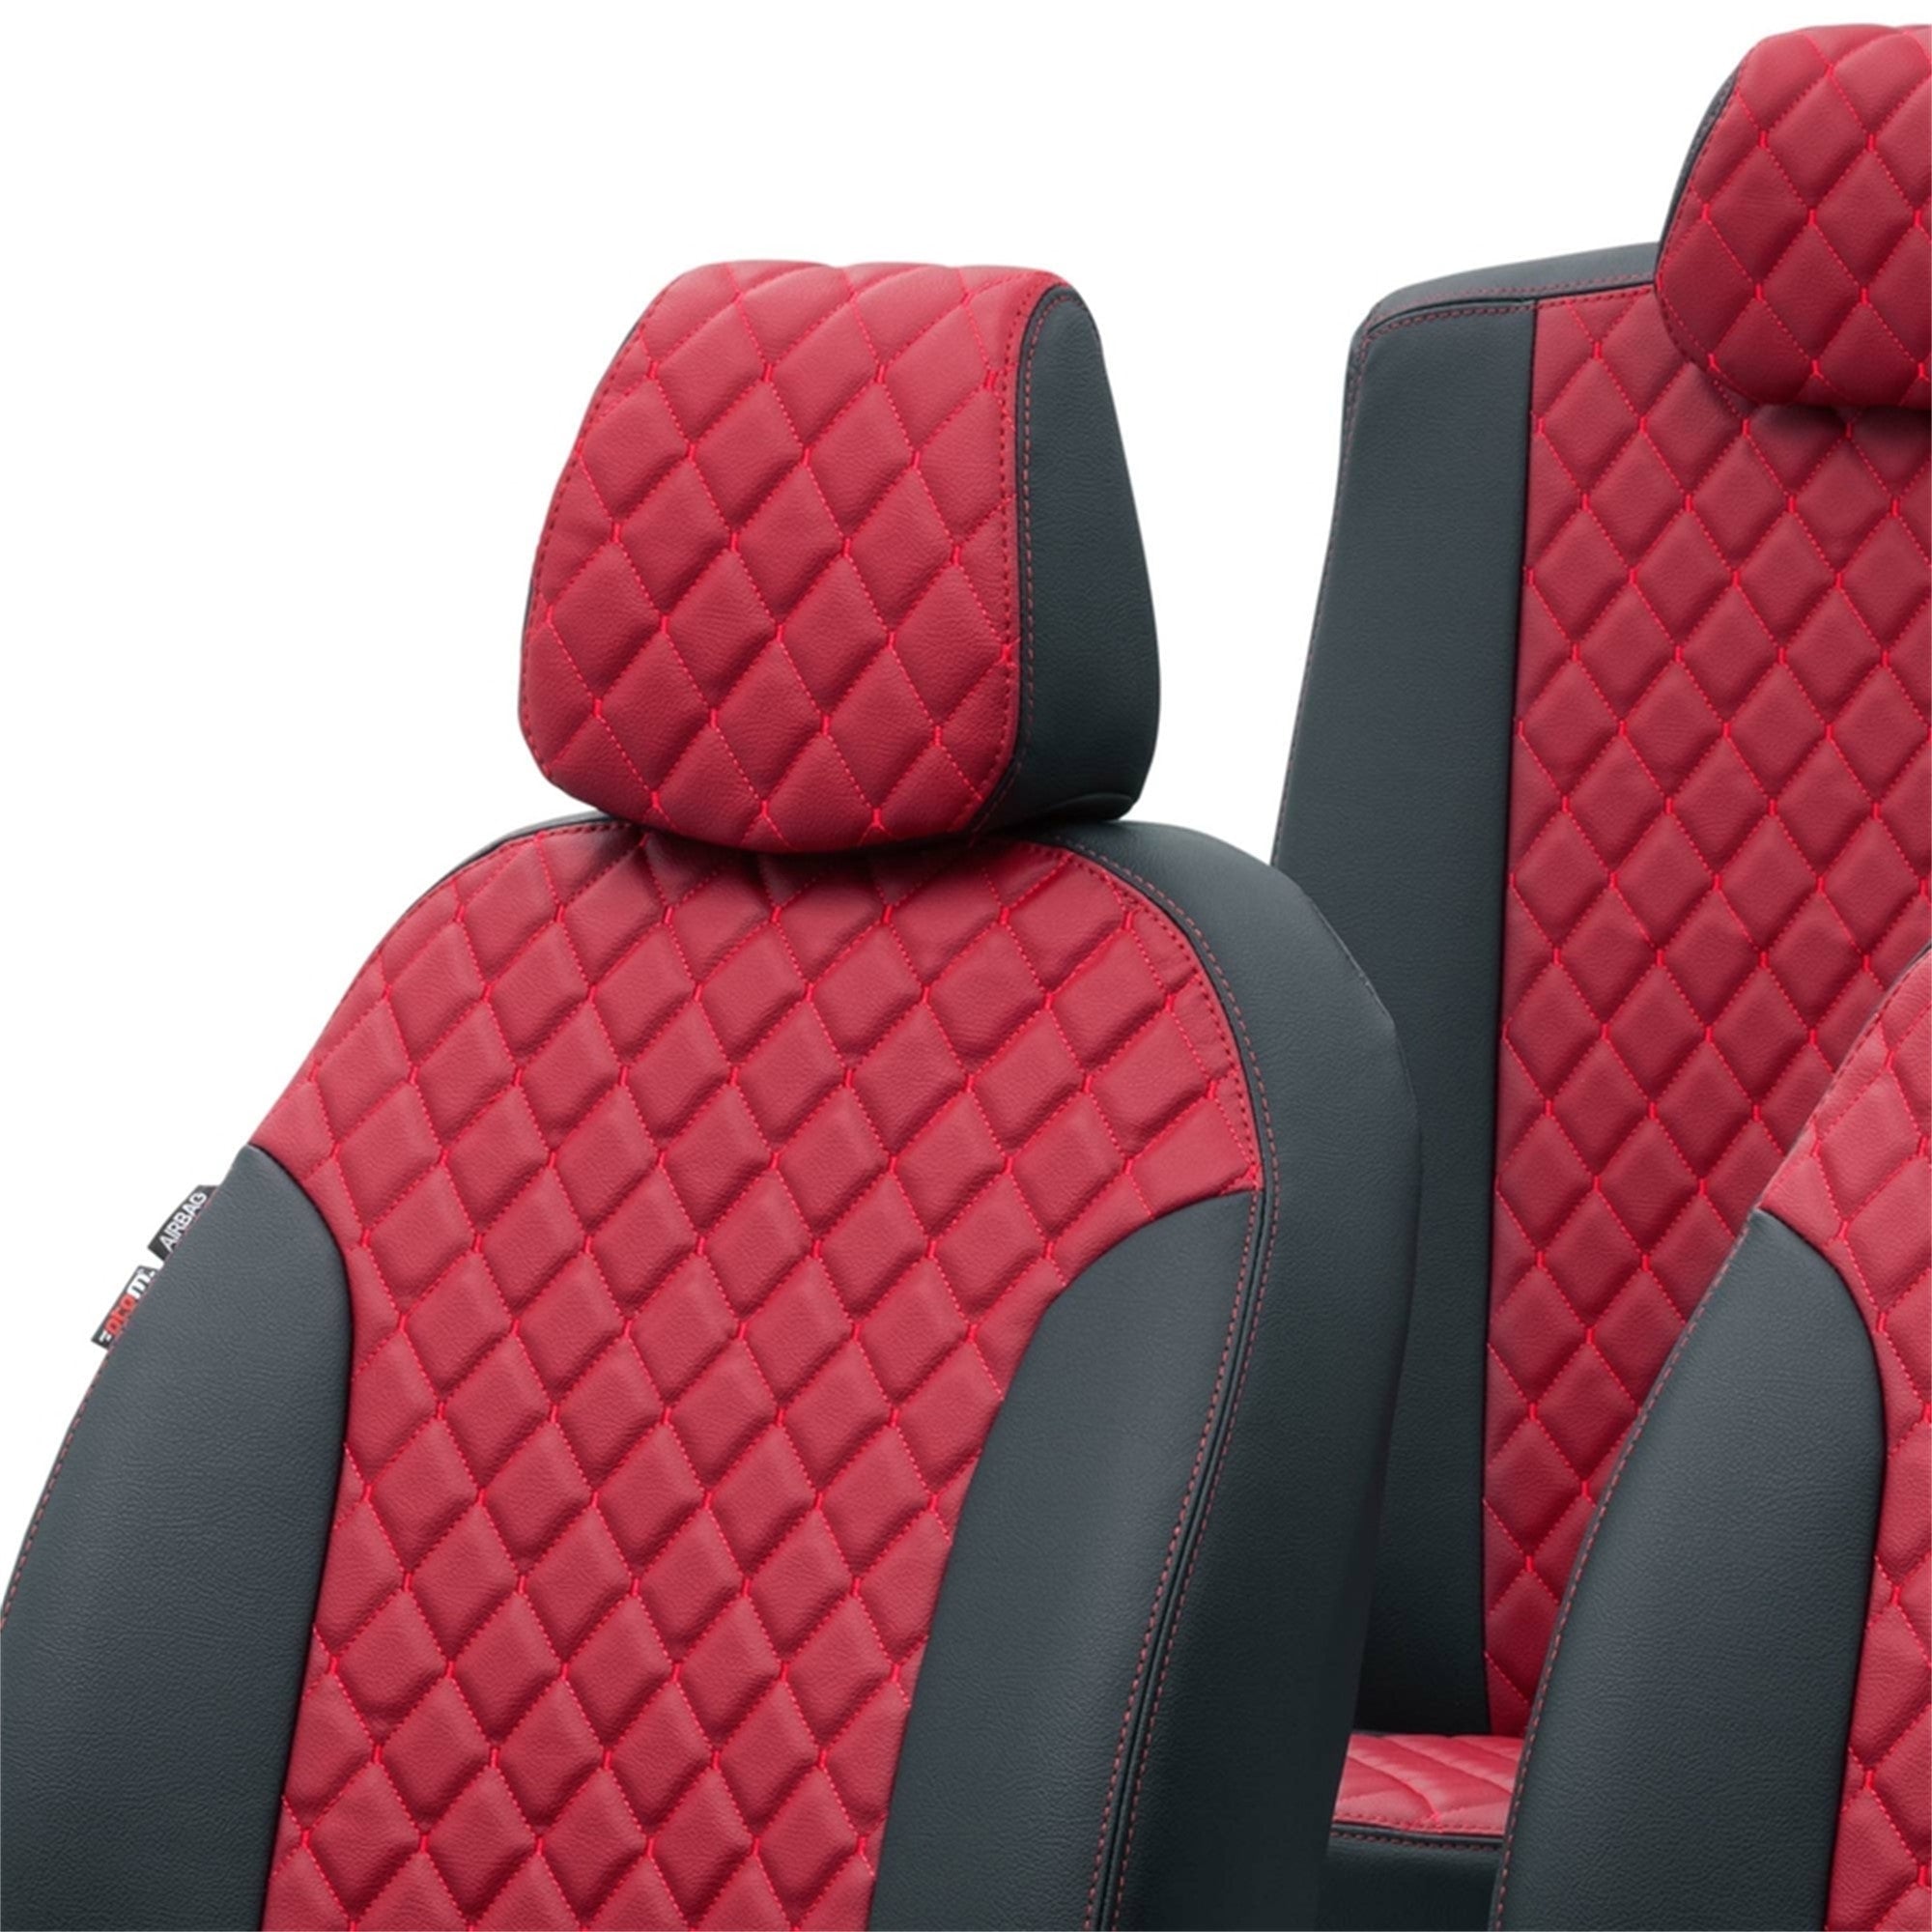 How To Clean Car Seat Covers ?